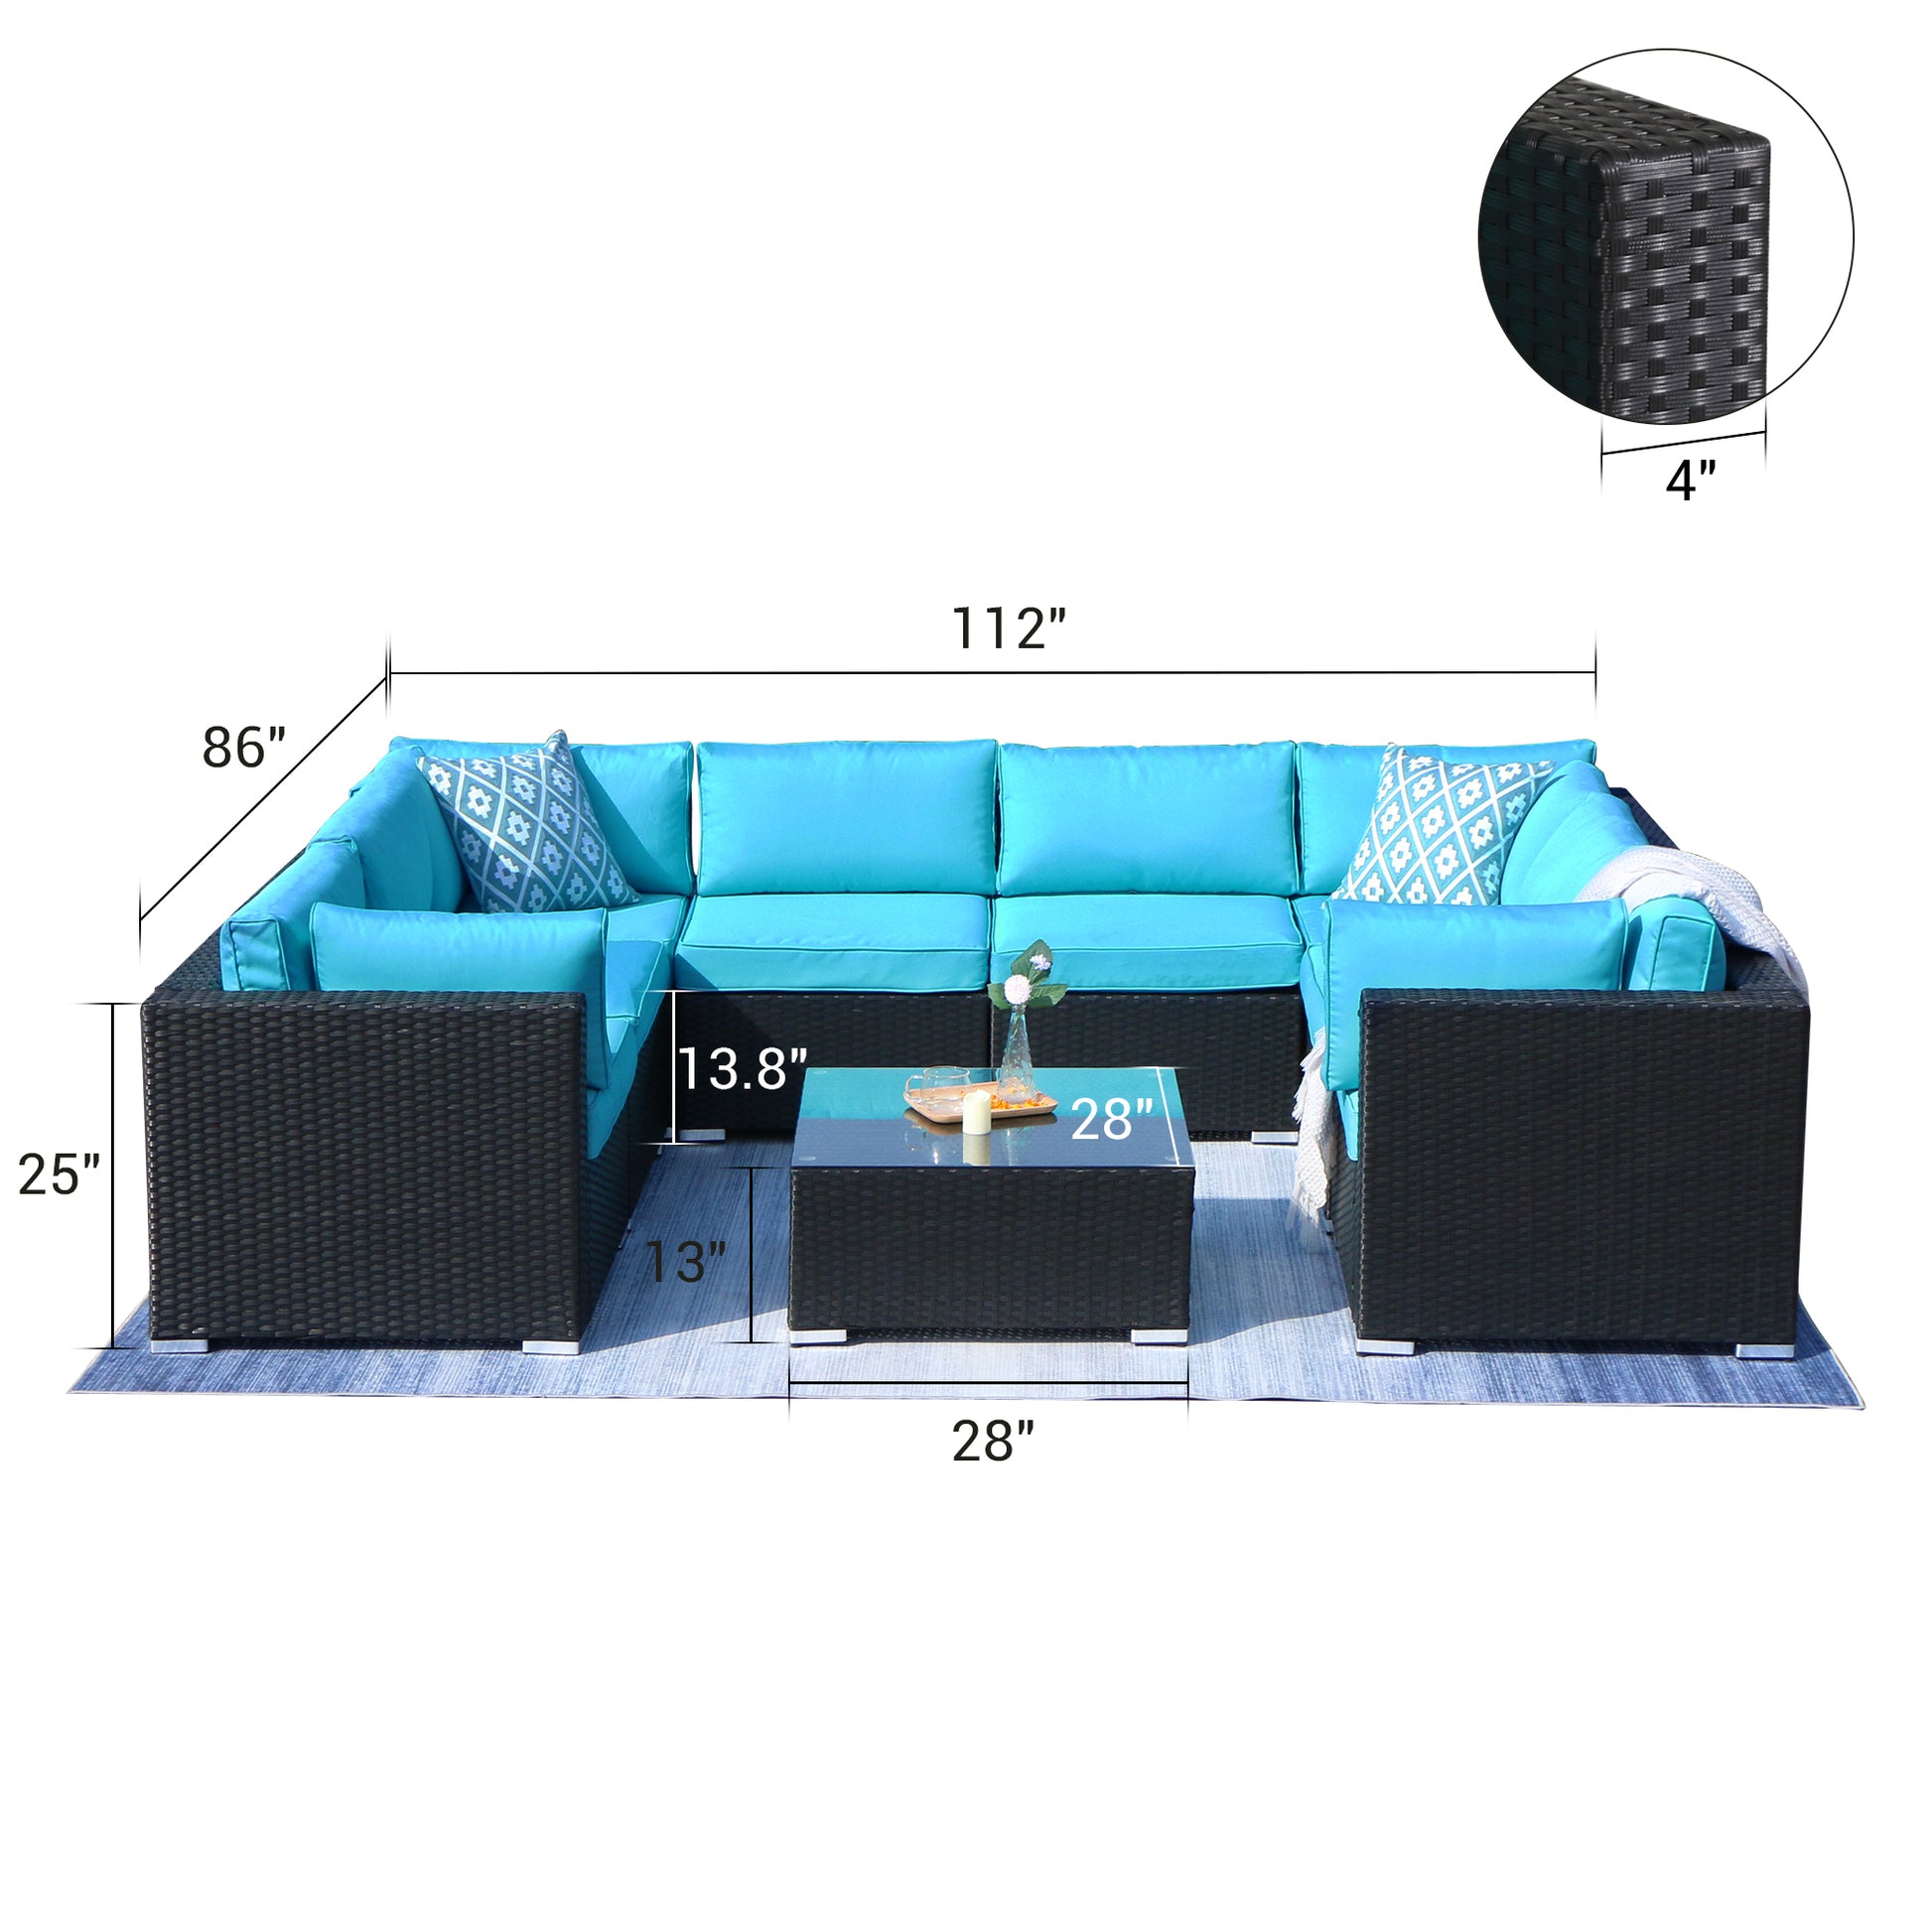 9 Piece Outdoor Conversation Rattan Sofa, with Coffee Table, Turquoise Cushions - Sunvivi